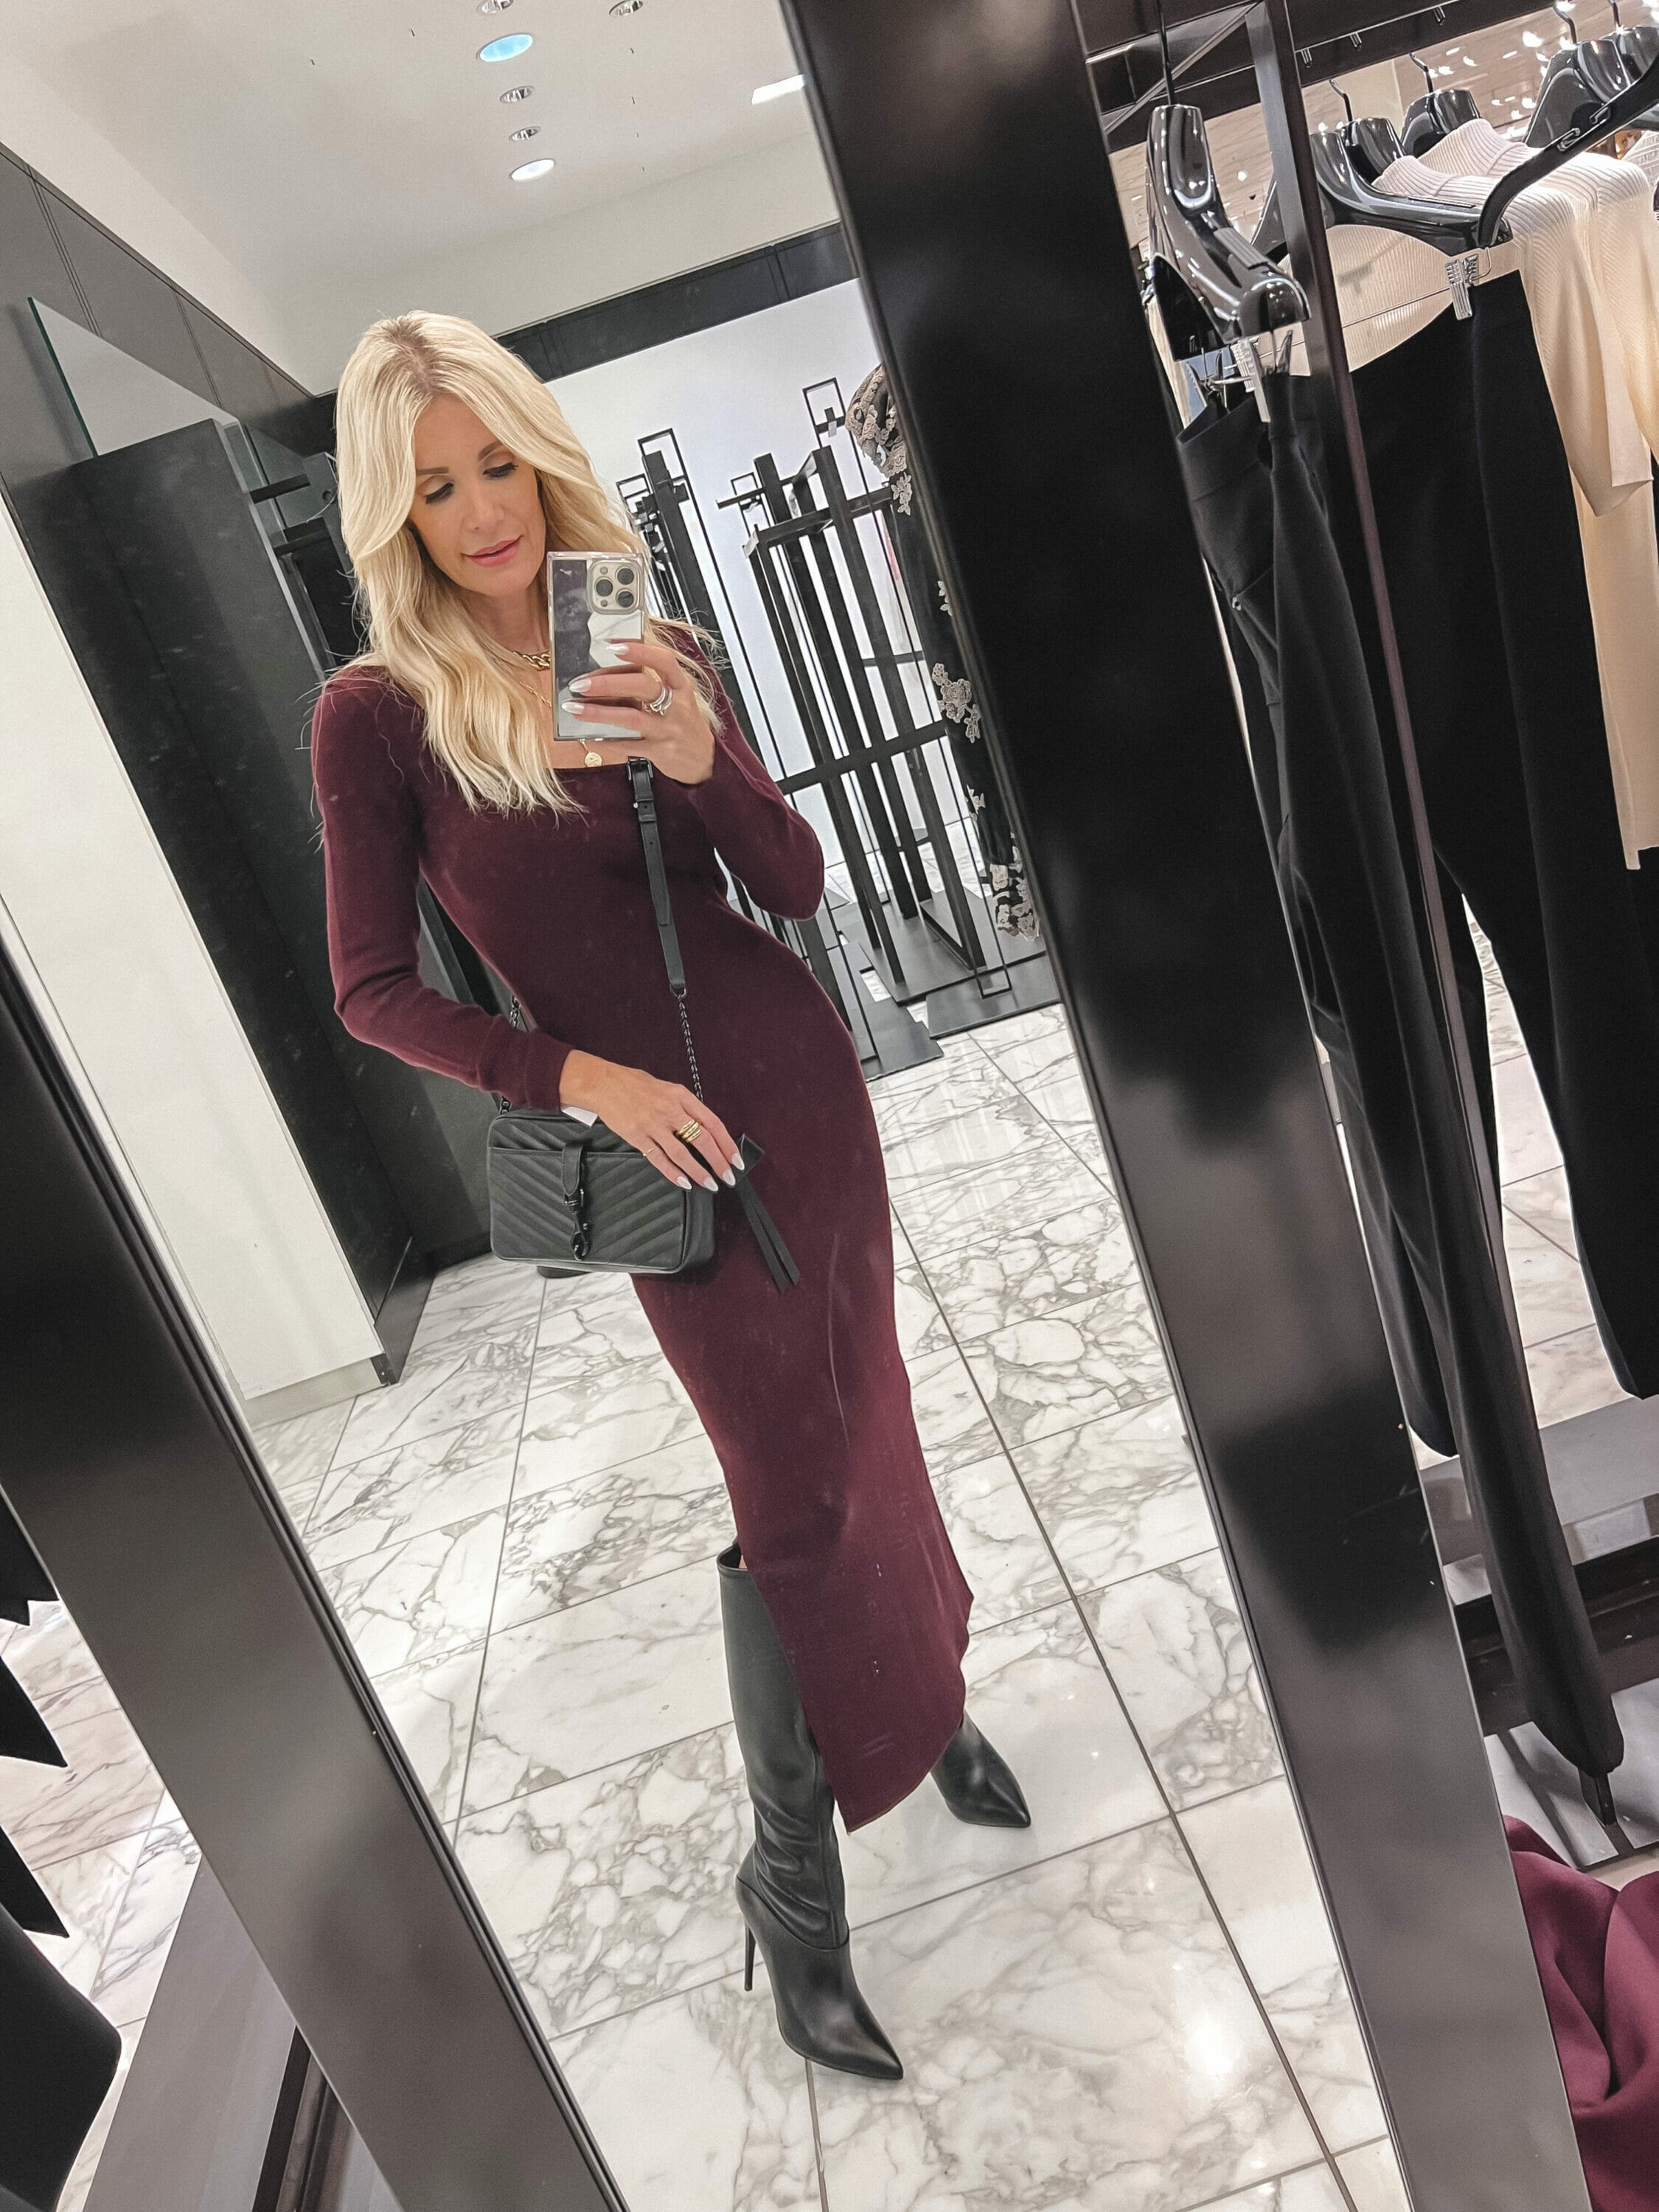 Dallas Fashion stylist wearing black knee high boots with a burgundy dress.